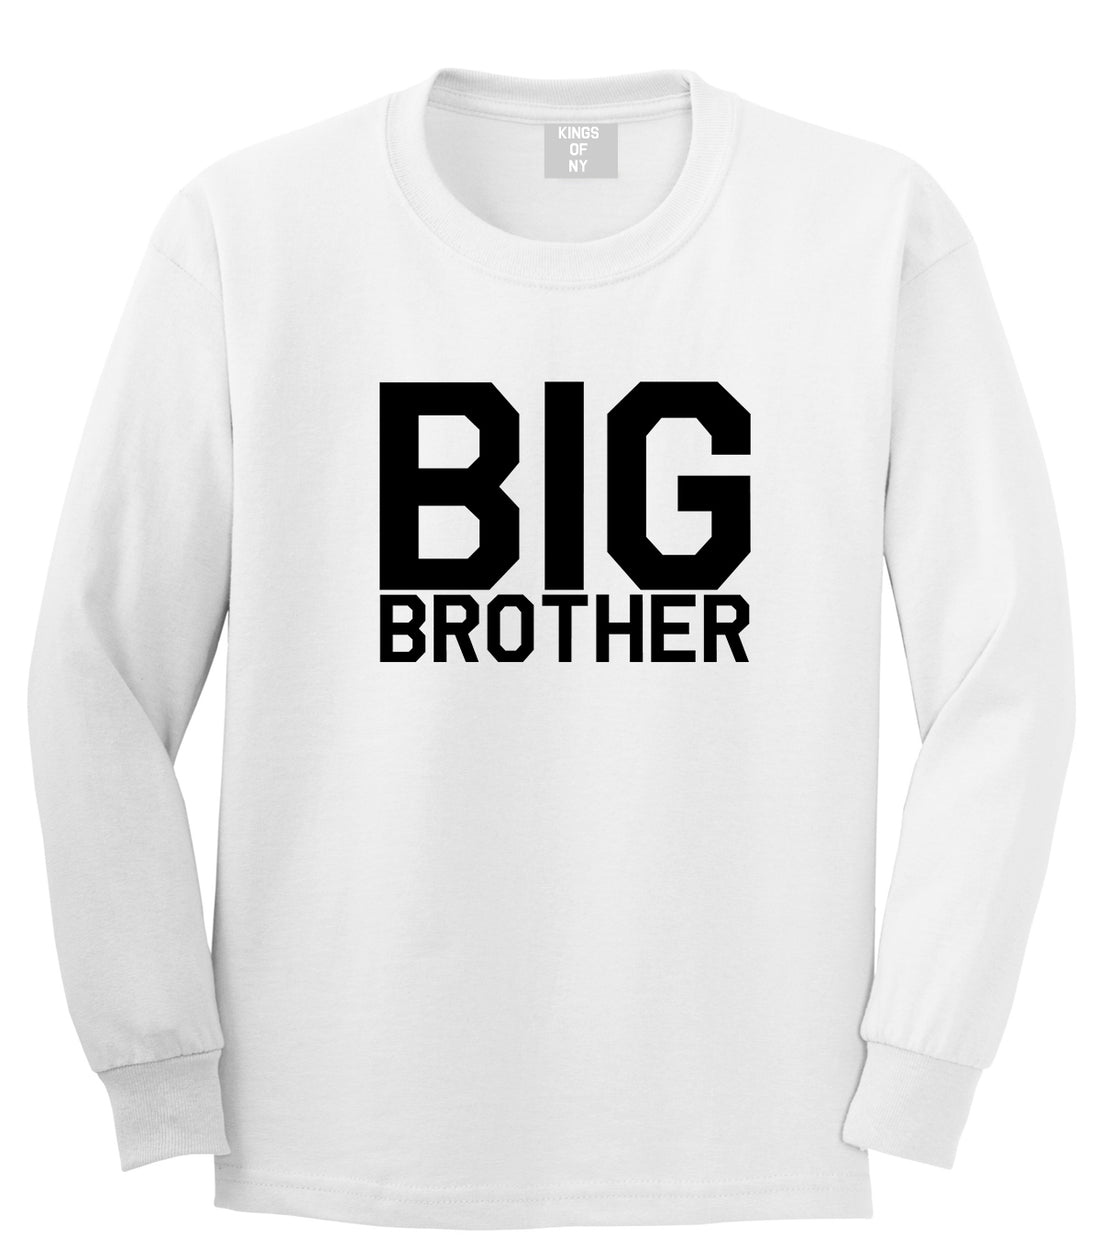 Big Brother White Long Sleeve T-Shirt by Kings Of NY